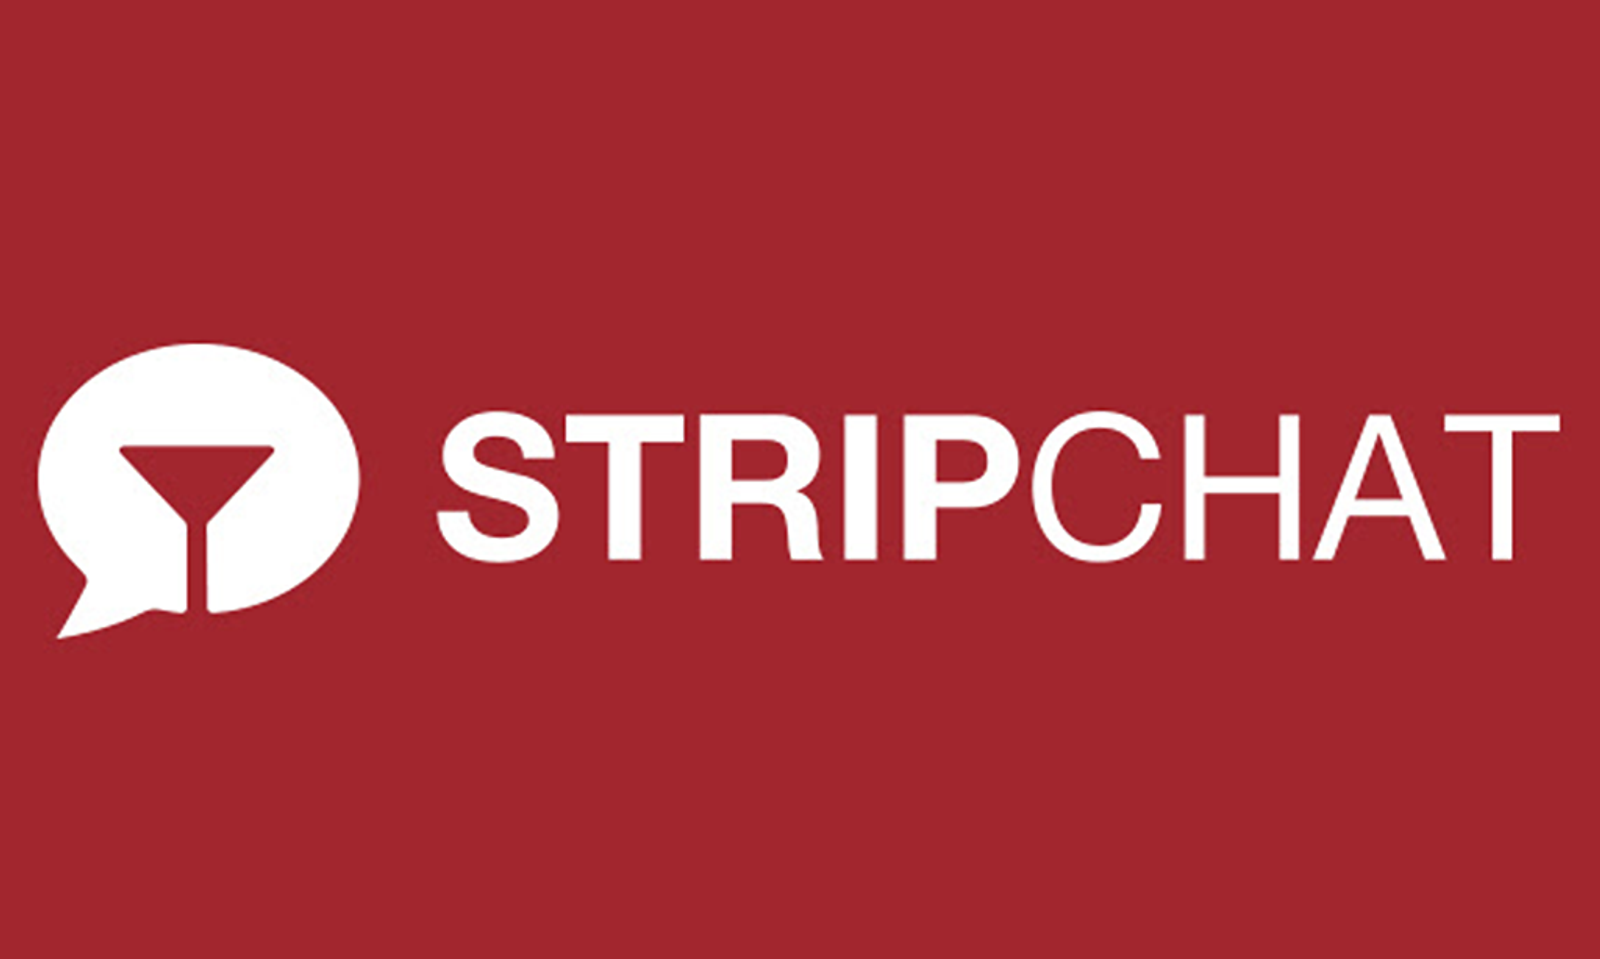 Stripchat south africa